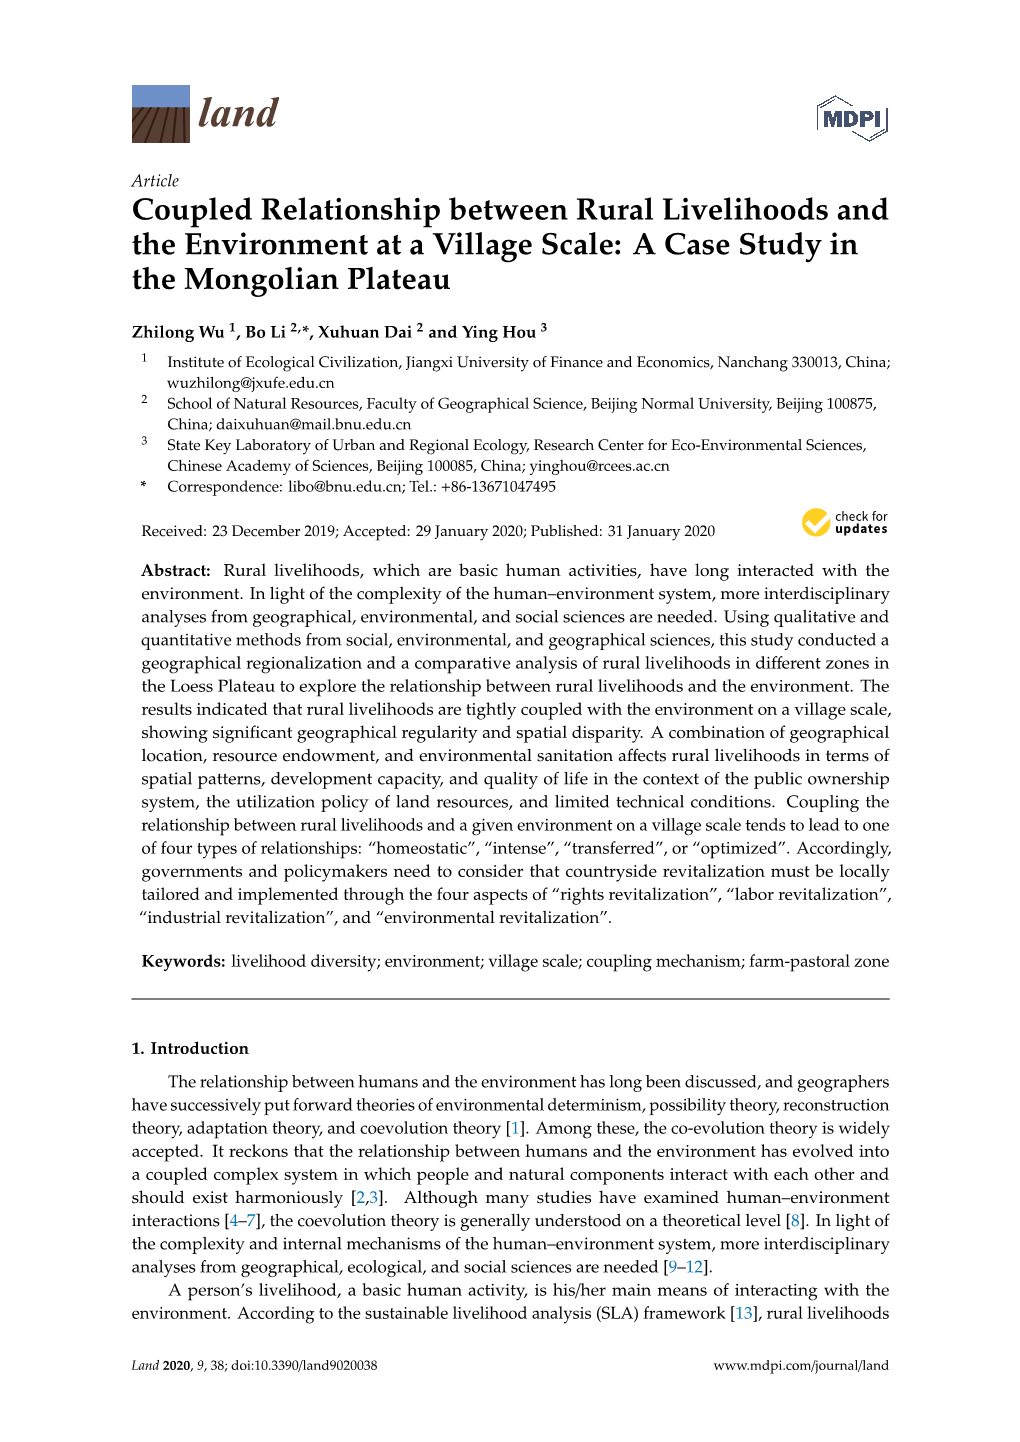 Coupled Relationship Between Rural Livelihoods and the Environment at a Village Scale: a Case Study in the Mongolian Plateau